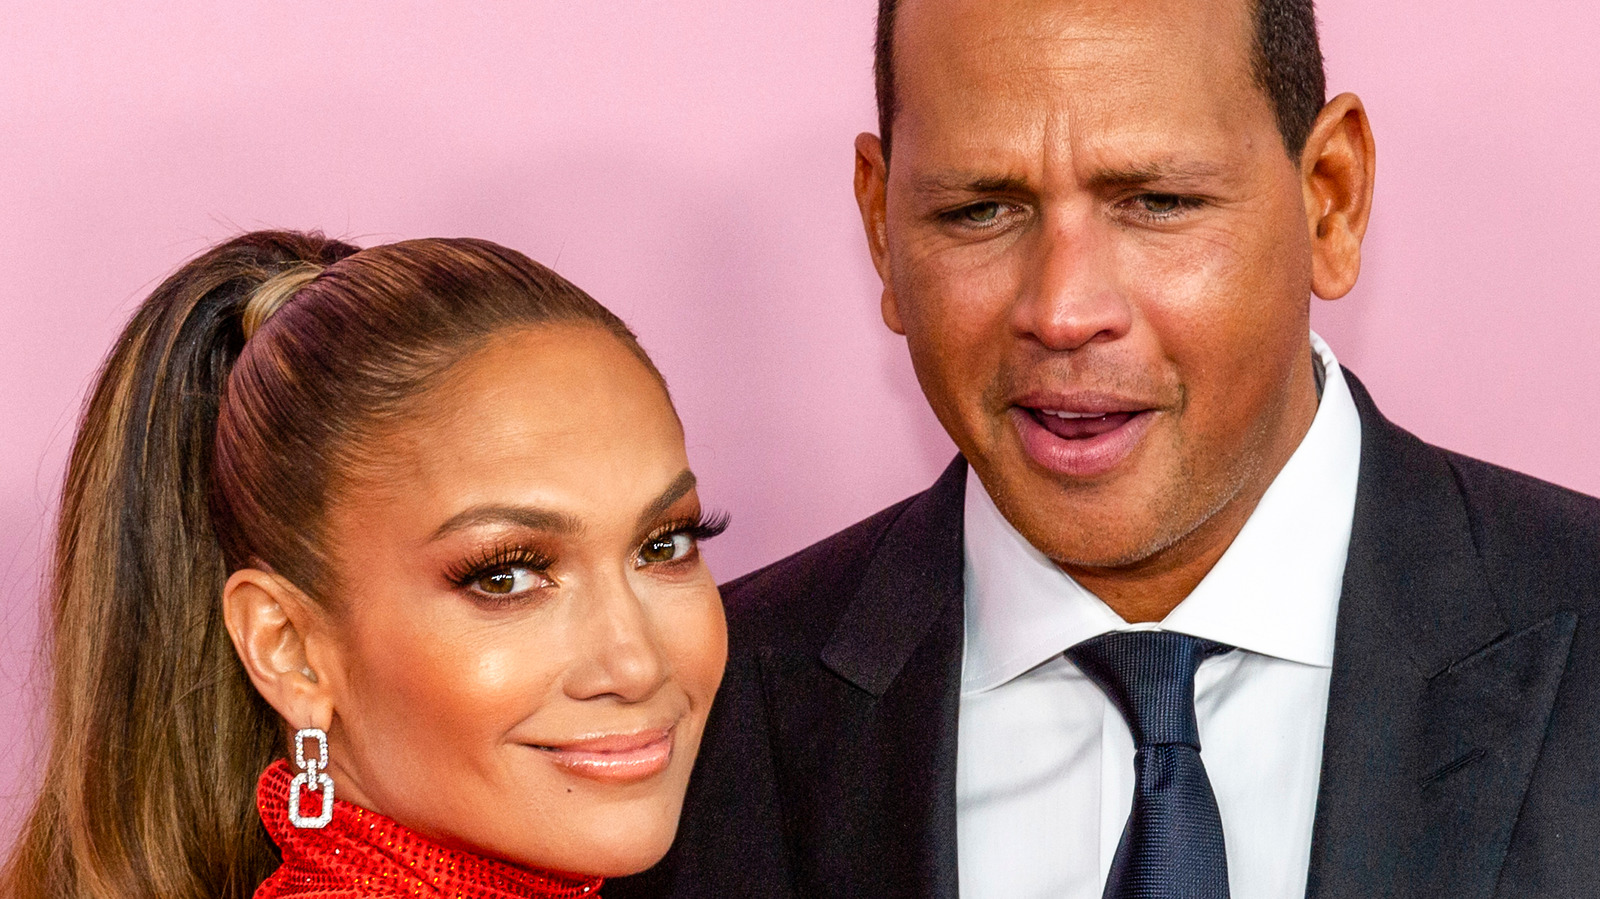 Is This How Alex Rodriguez's Ex Feels About Jennifer Lopez?